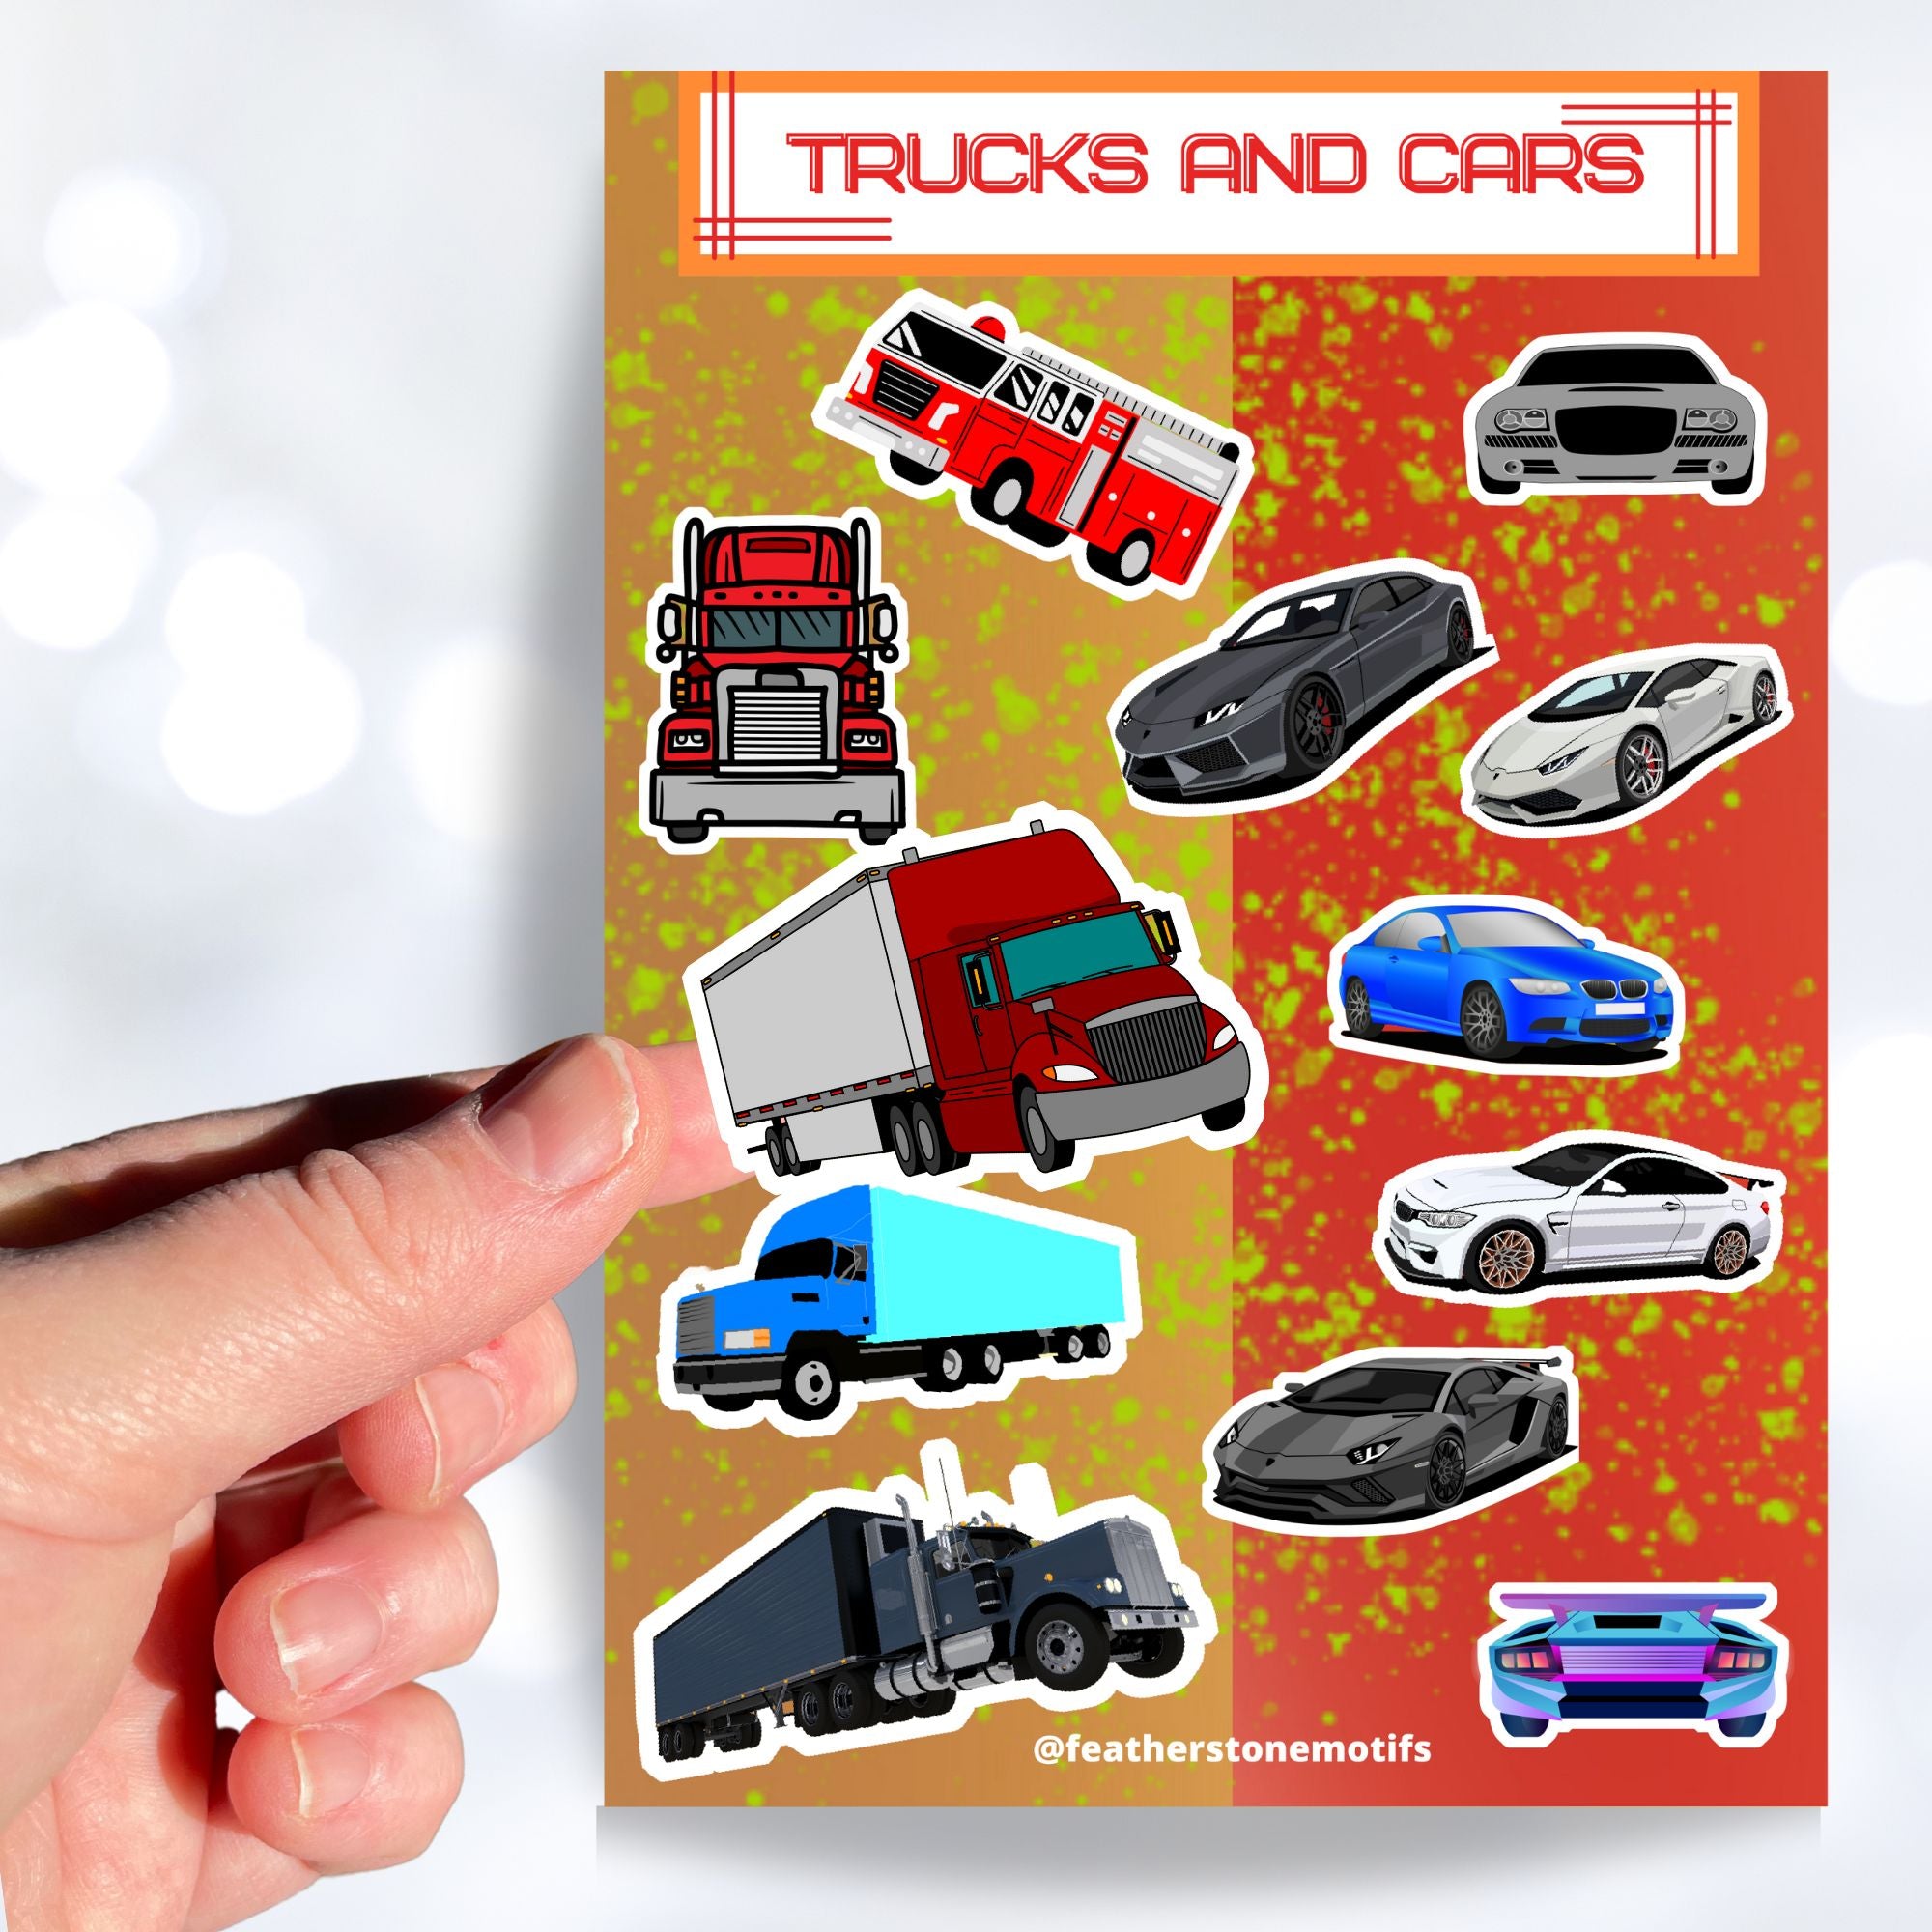 This sticker sheet has a collection of truck and car stickers; perfect for kids and adults who like their four wheel friends! This sheet has five different truck stickers and seven different car stickers on an orange and yellow background. This image shows a hand holding a sticker of a semi truck above the sticker sheet.